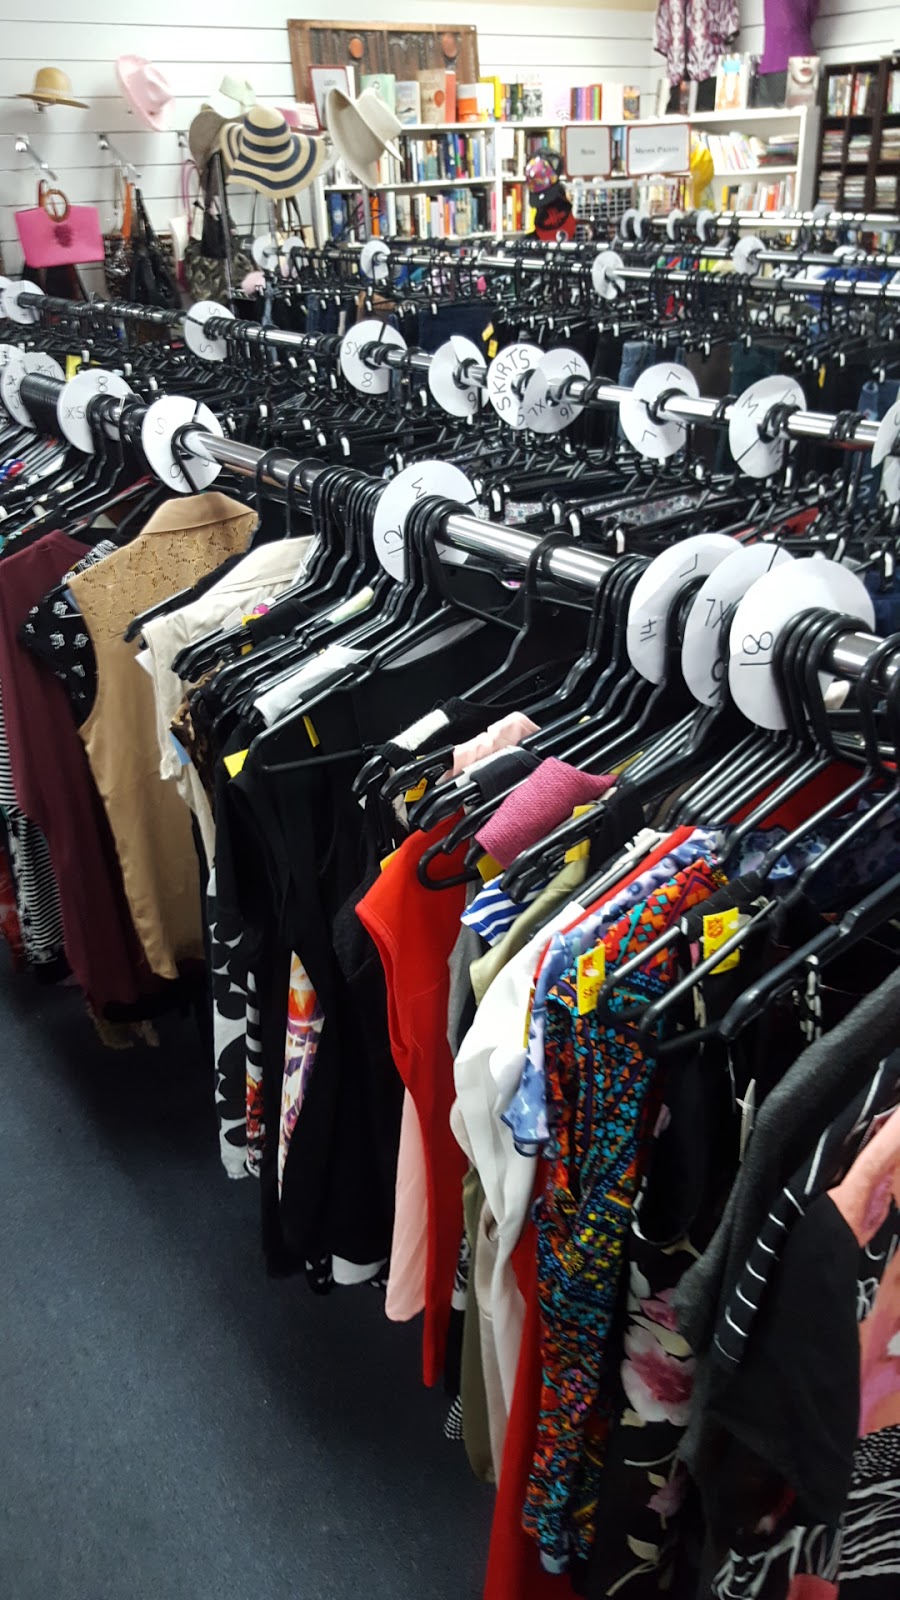 Salvos Stores Walkley Heights | store | Shop 1 Walkley Heights Shopping Centre, 1-11 R M Wiiliams Drive, Walkley Heights SA 5098, Australia | 0881625547 OR +61 8 8162 5547